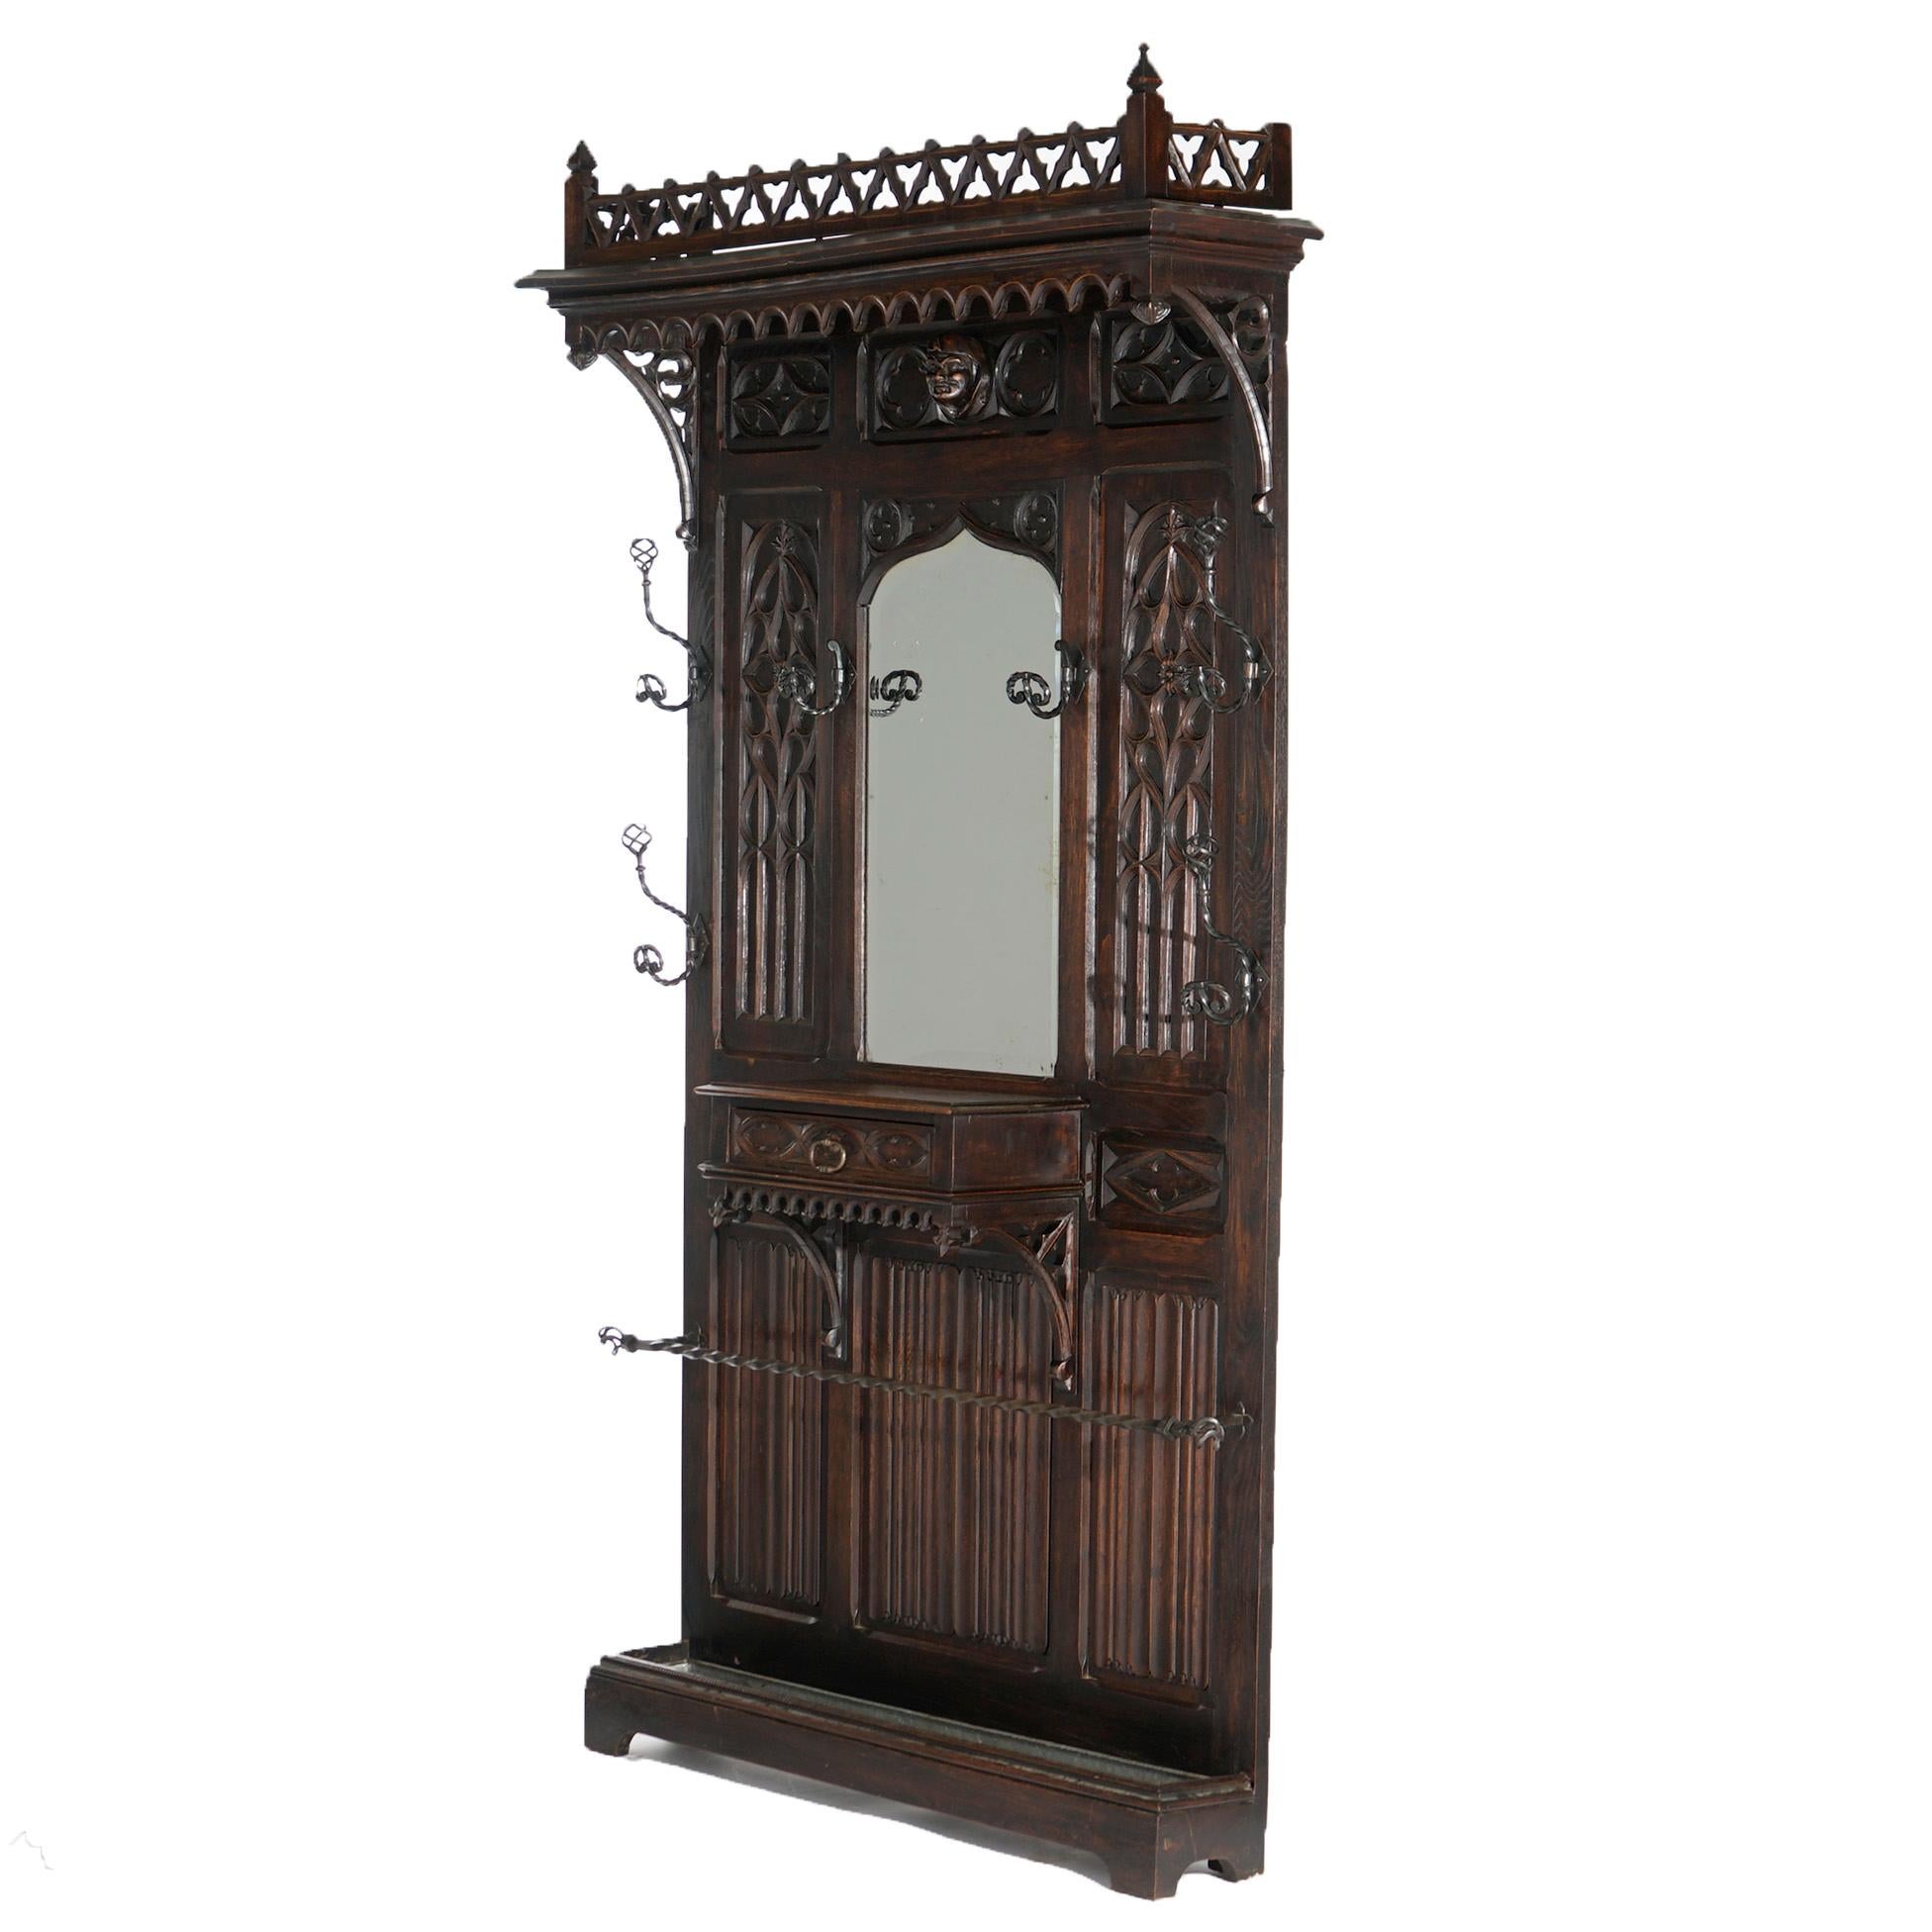 An oversized antique Gothic Revival figural hall mirror offers carved English oak construction with upper pierced gallery over frieze having central mask, arch form mirror, hardware for garments and central drawer, c1900

Measures- 93'' H x 50.5'' W